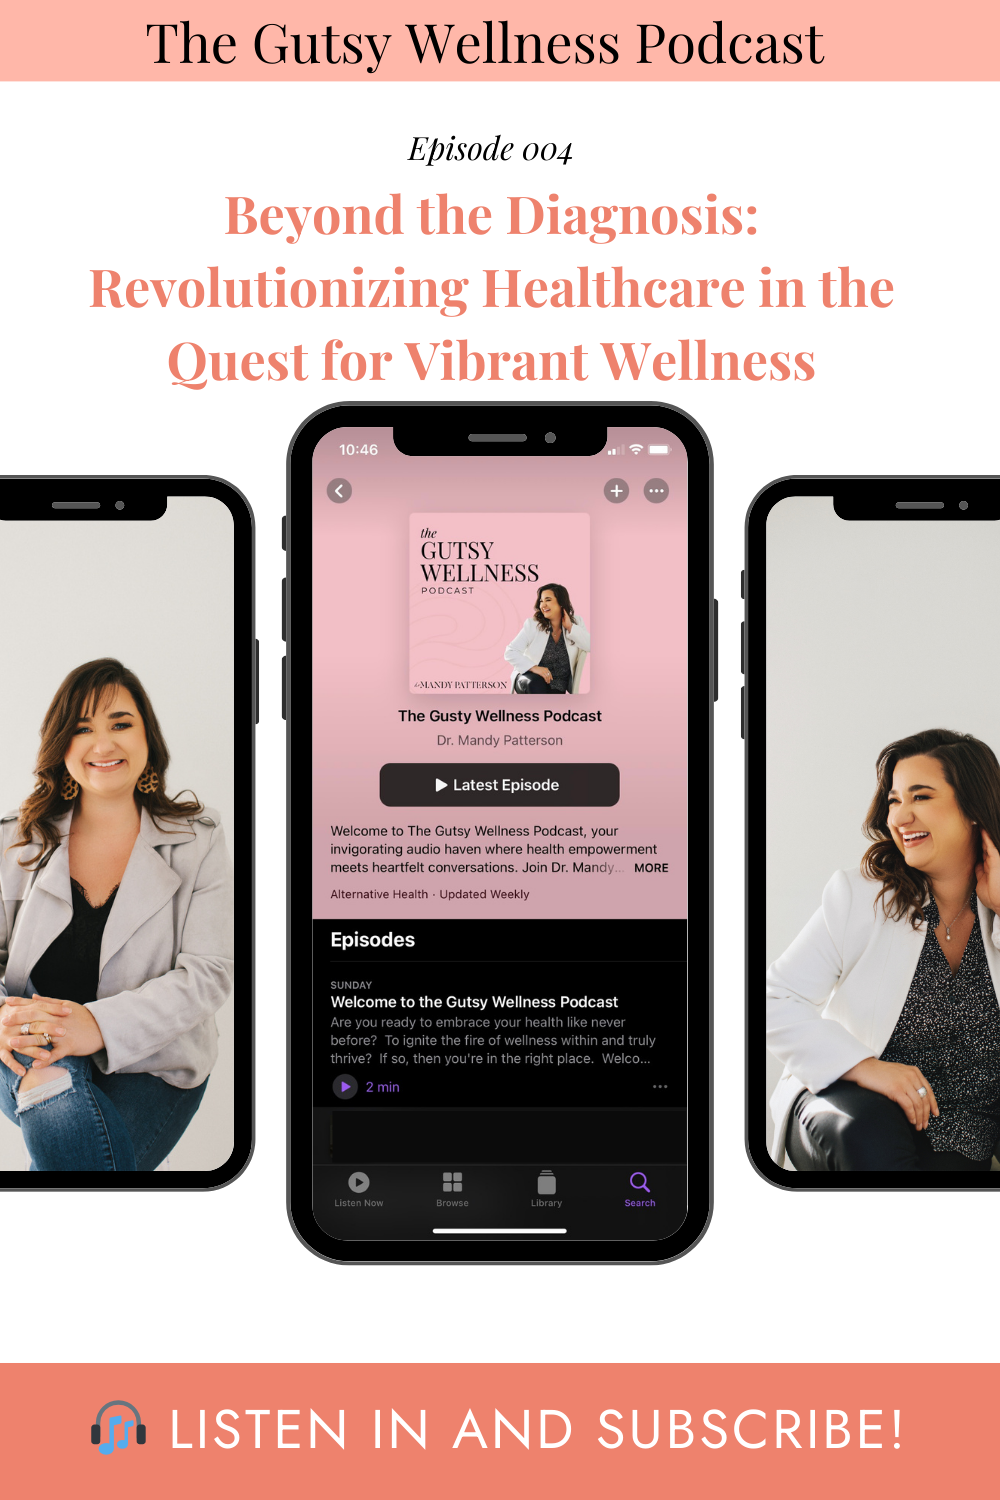 Beyond the Diagnosis: Revolutionizing Healthcare in the Quest for Vibrant Wellness